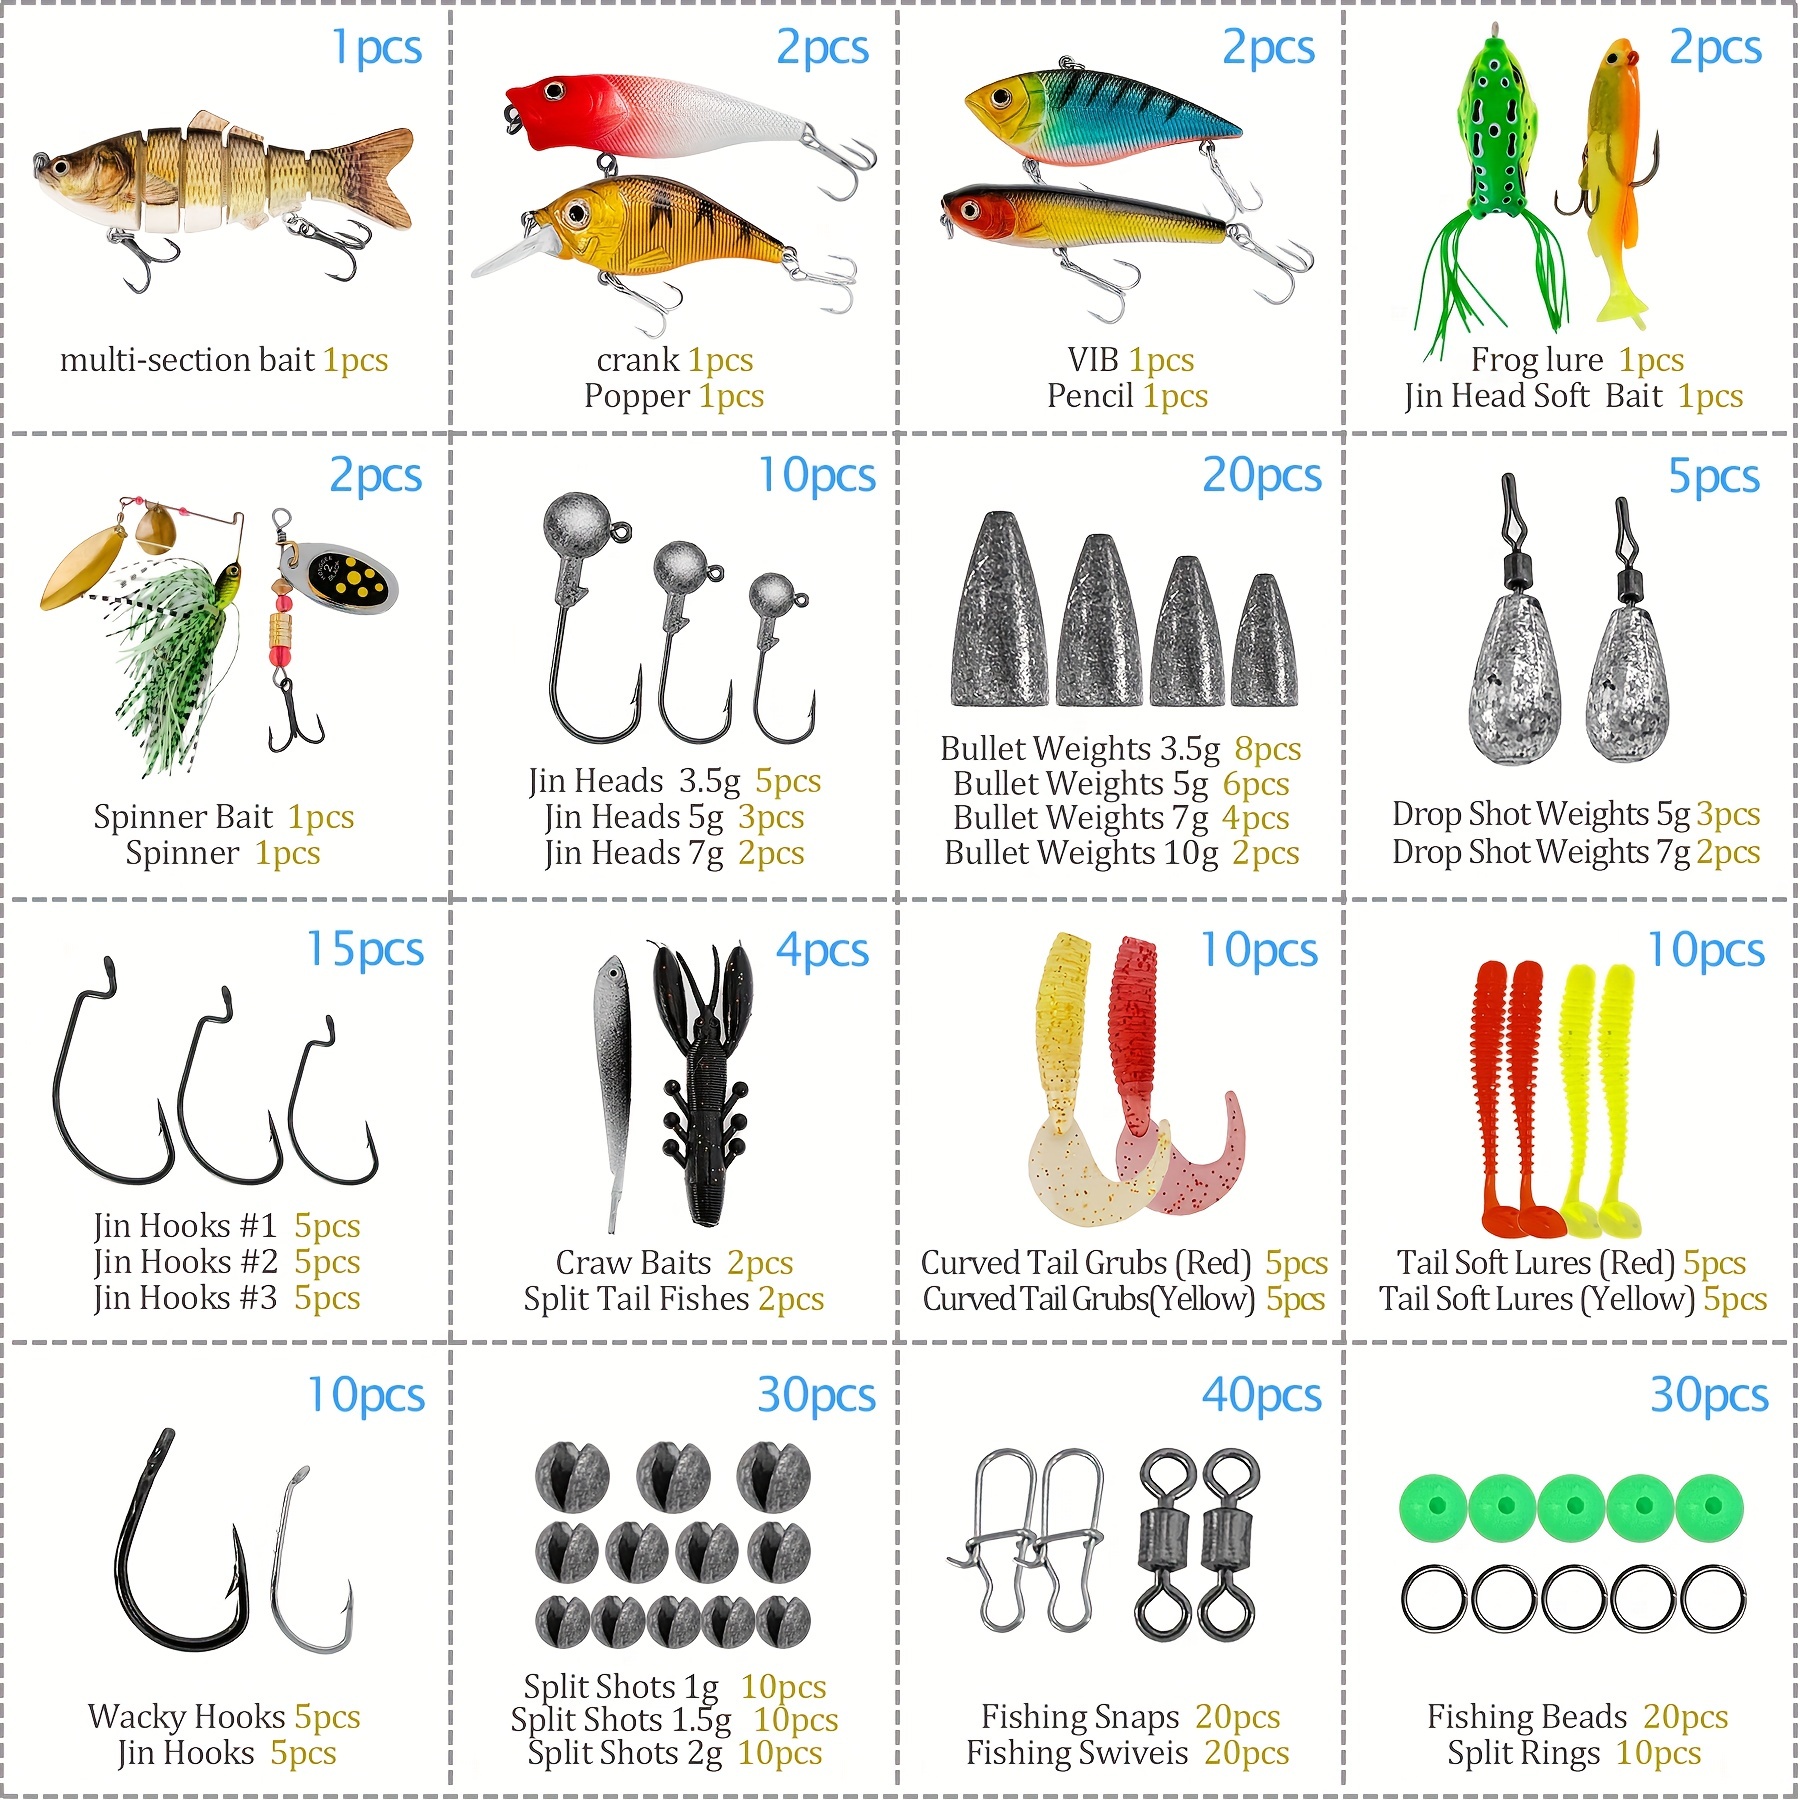 193pcs Complete Fishing Lure Kit - Includes Crankbaits, Spinnerbaits, Jig  Hooks, Minnow Vib, Plastic Worms, Topwater Lures, Tackle Box and Accessories